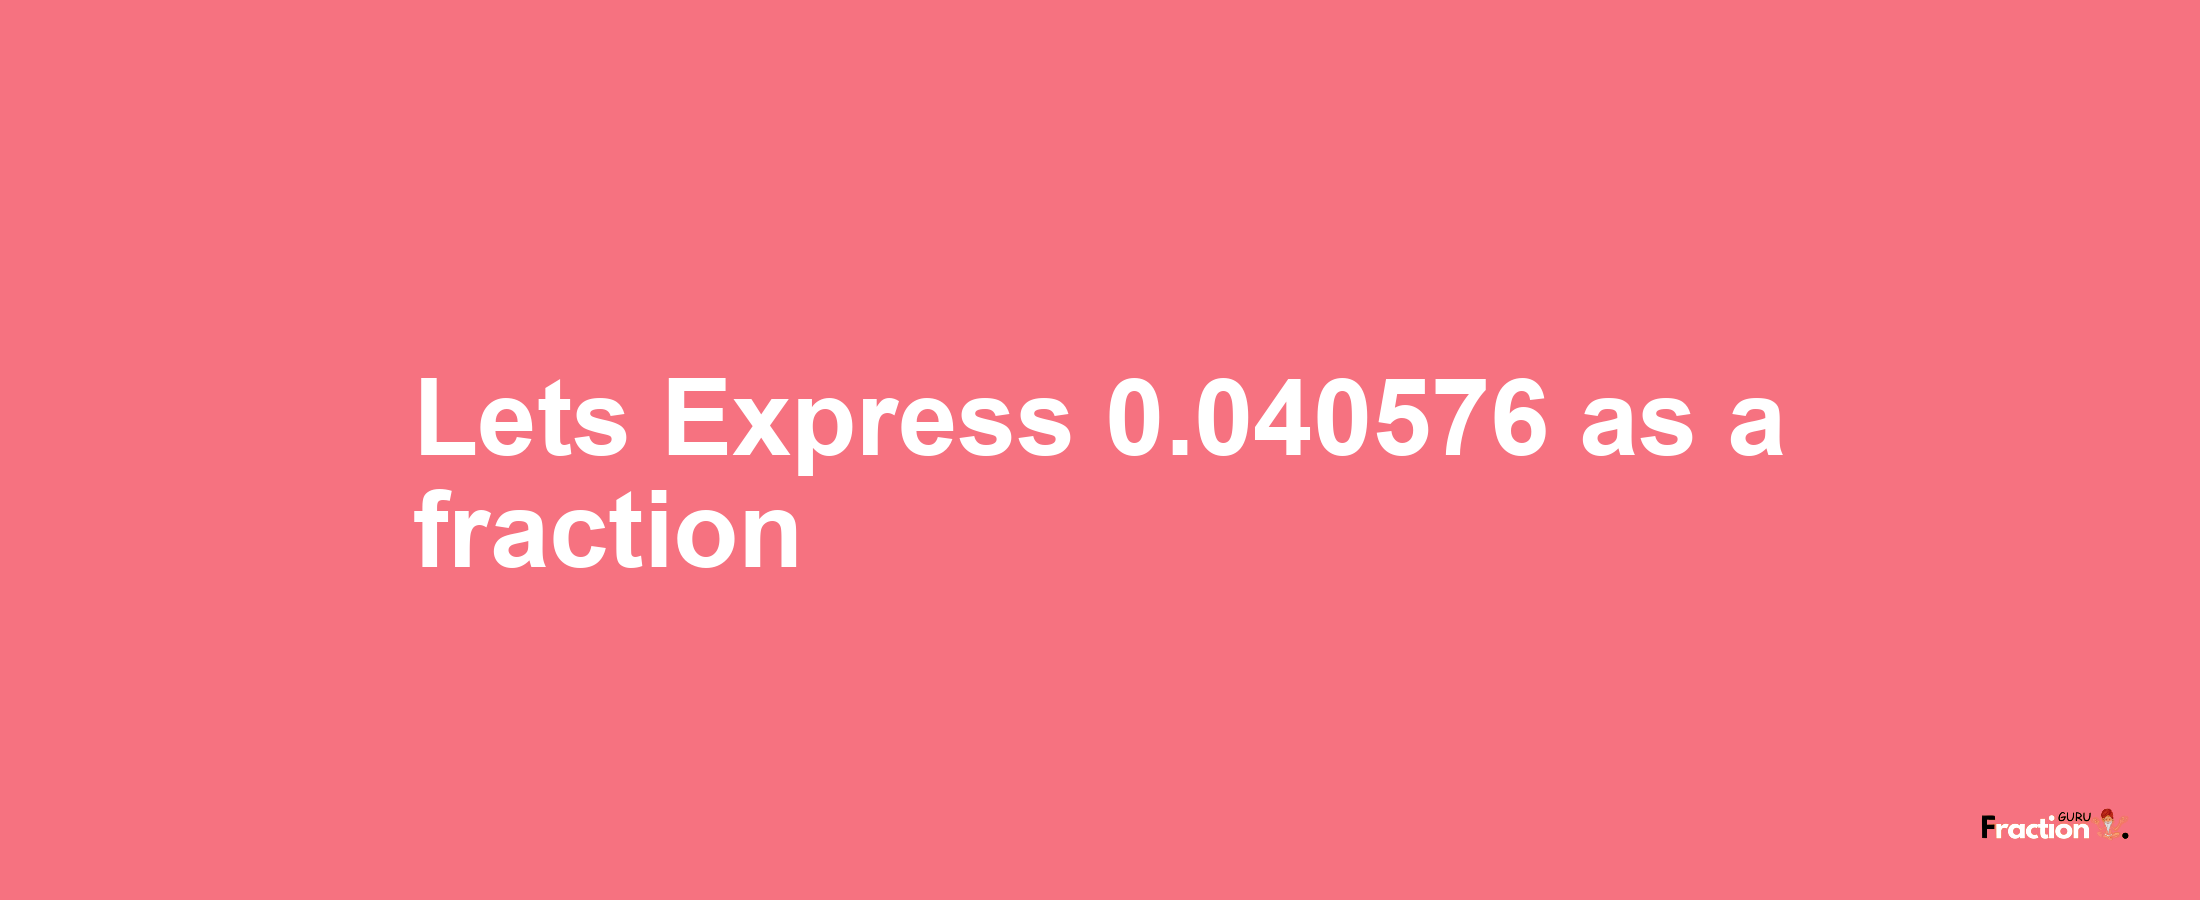 Lets Express 0.040576 as afraction